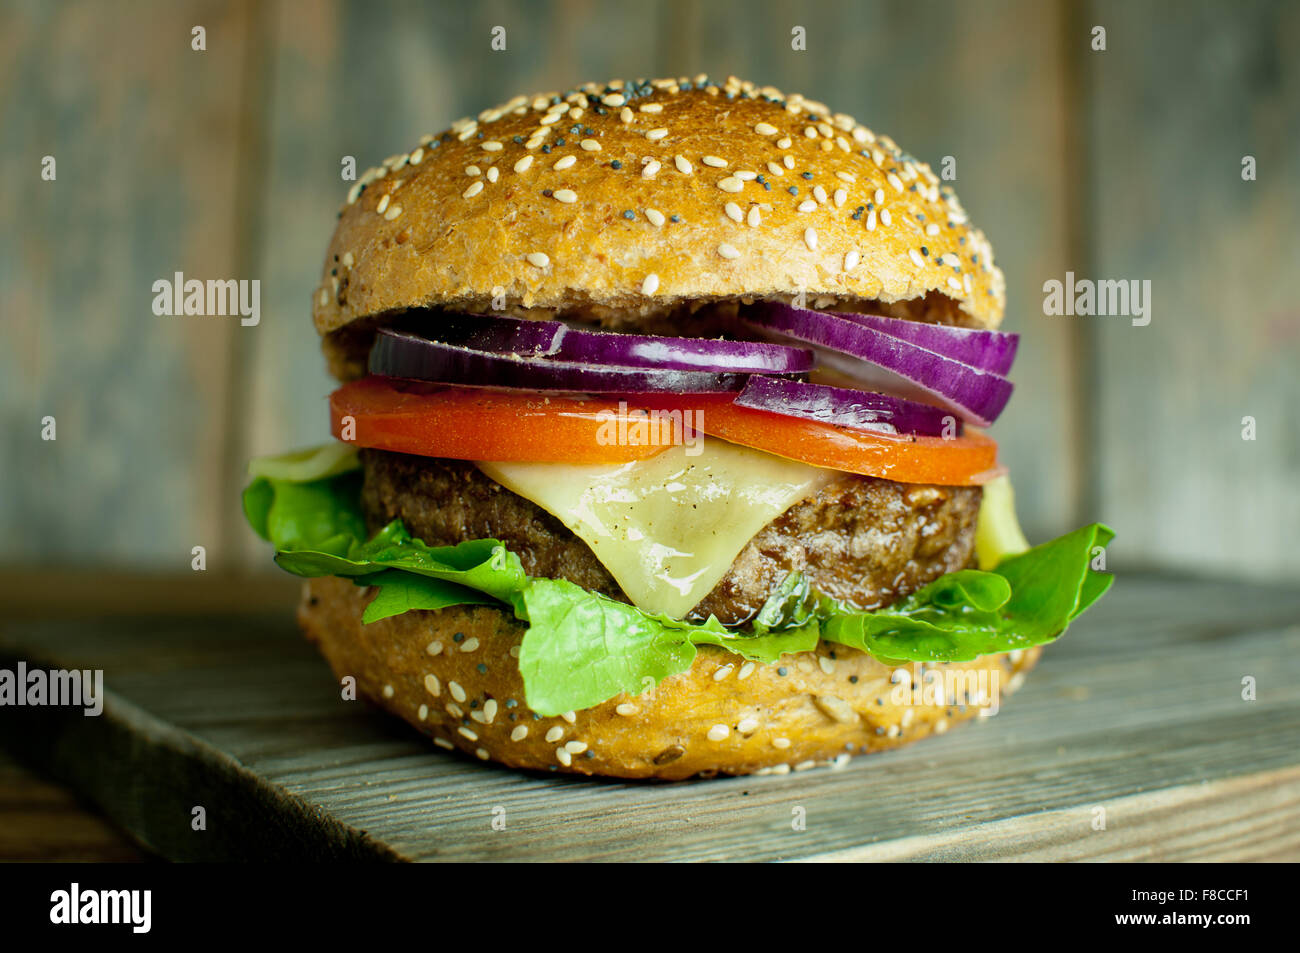 Cheese burger with tomato and onion filling on top of a wooden chopping board Stock Photo